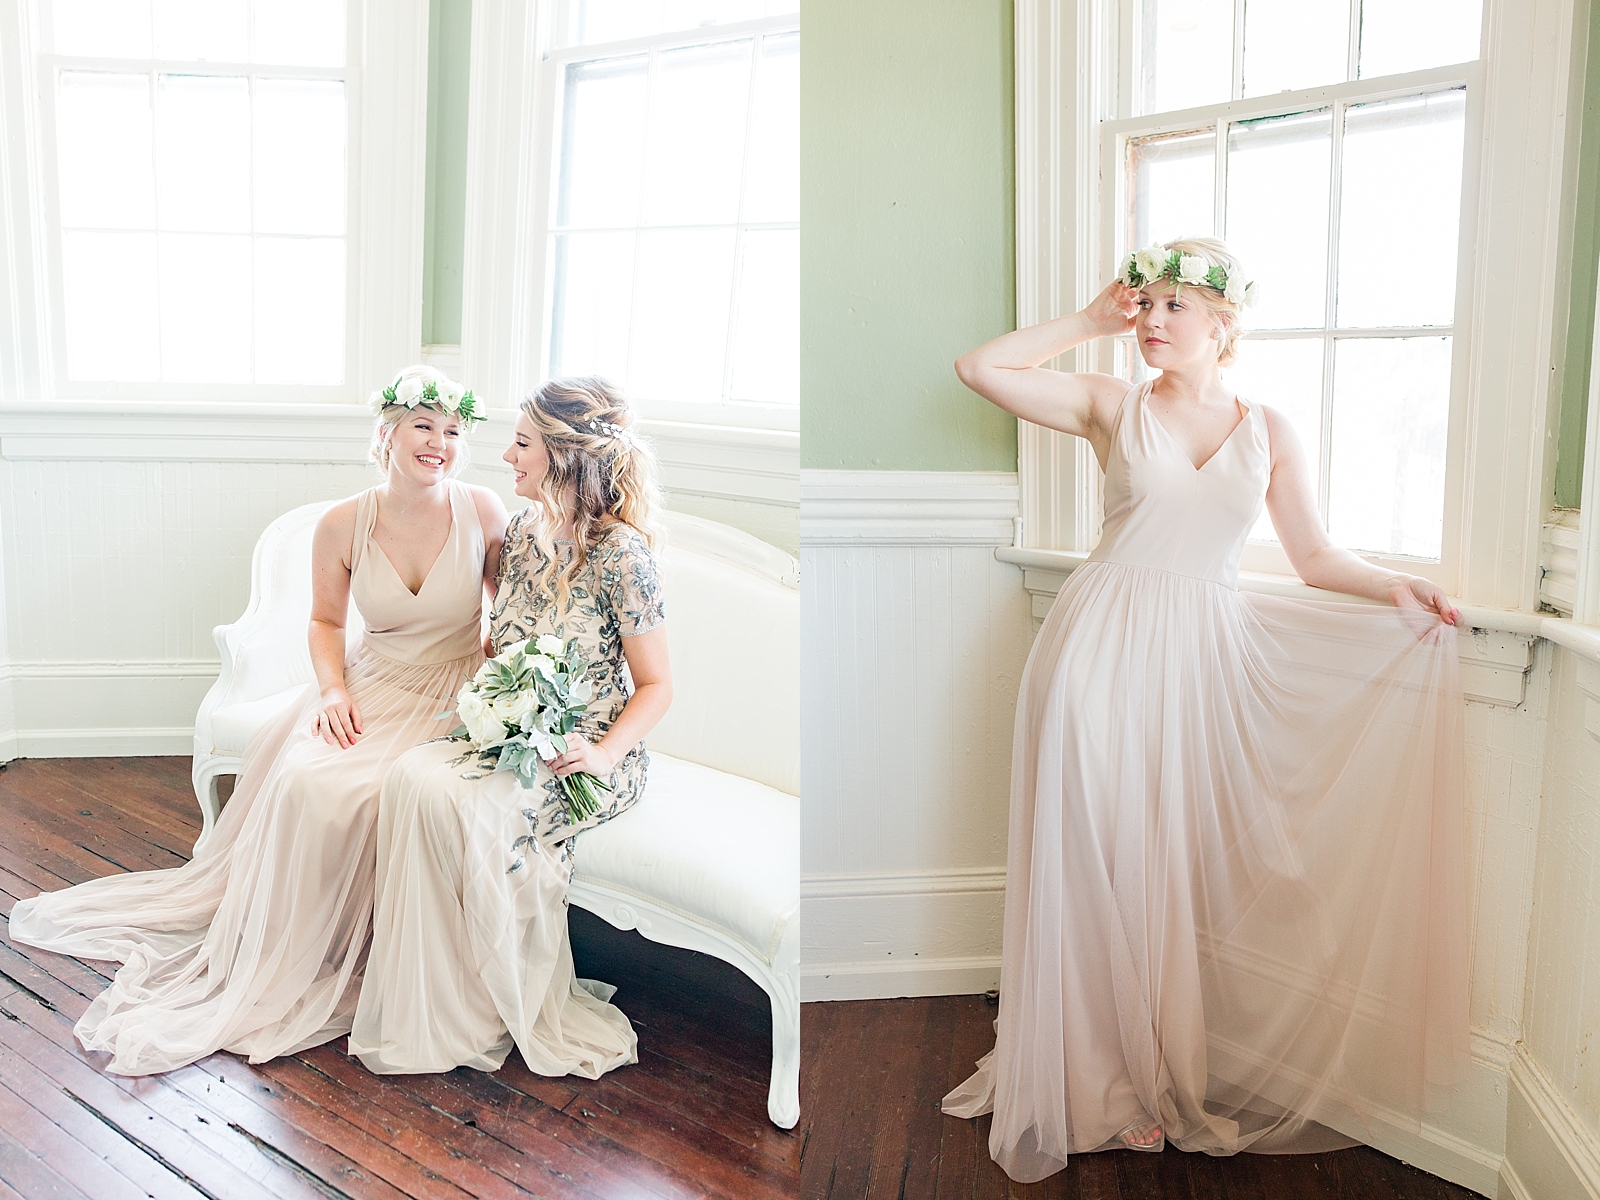 Atlanta Georgia Wedding bride and bridesmaid laughing on couch and bridesmaid by window Photos